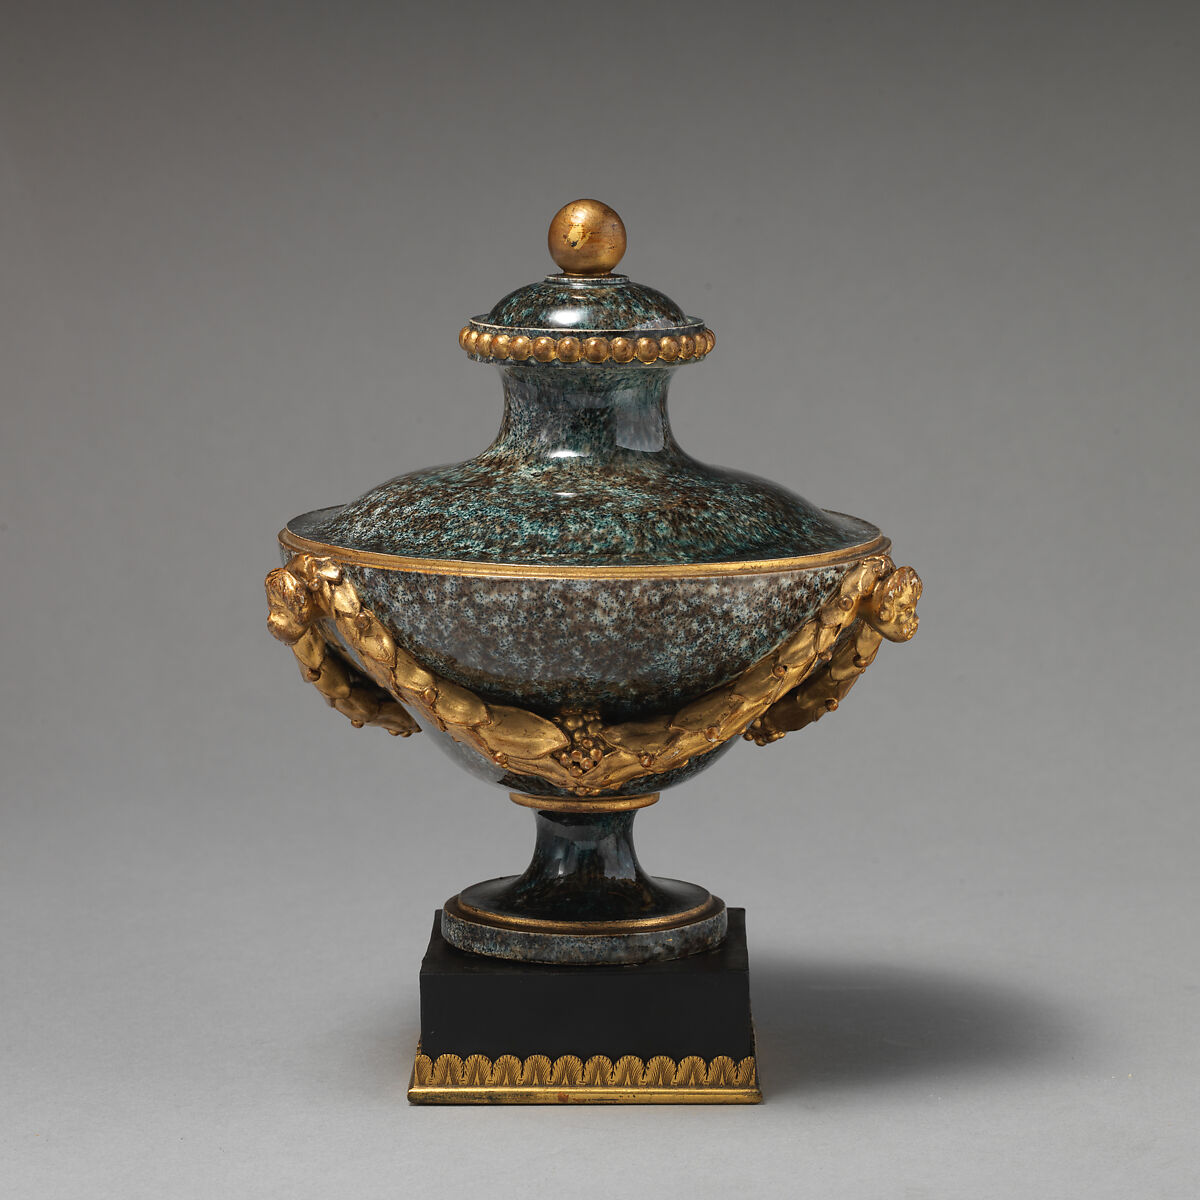 Vase with cover, Wedgwood and Bentley (British, Etruria, Staffordshire, 1769–1780), Porphyry ware, British, Etruria, Staffordshire 